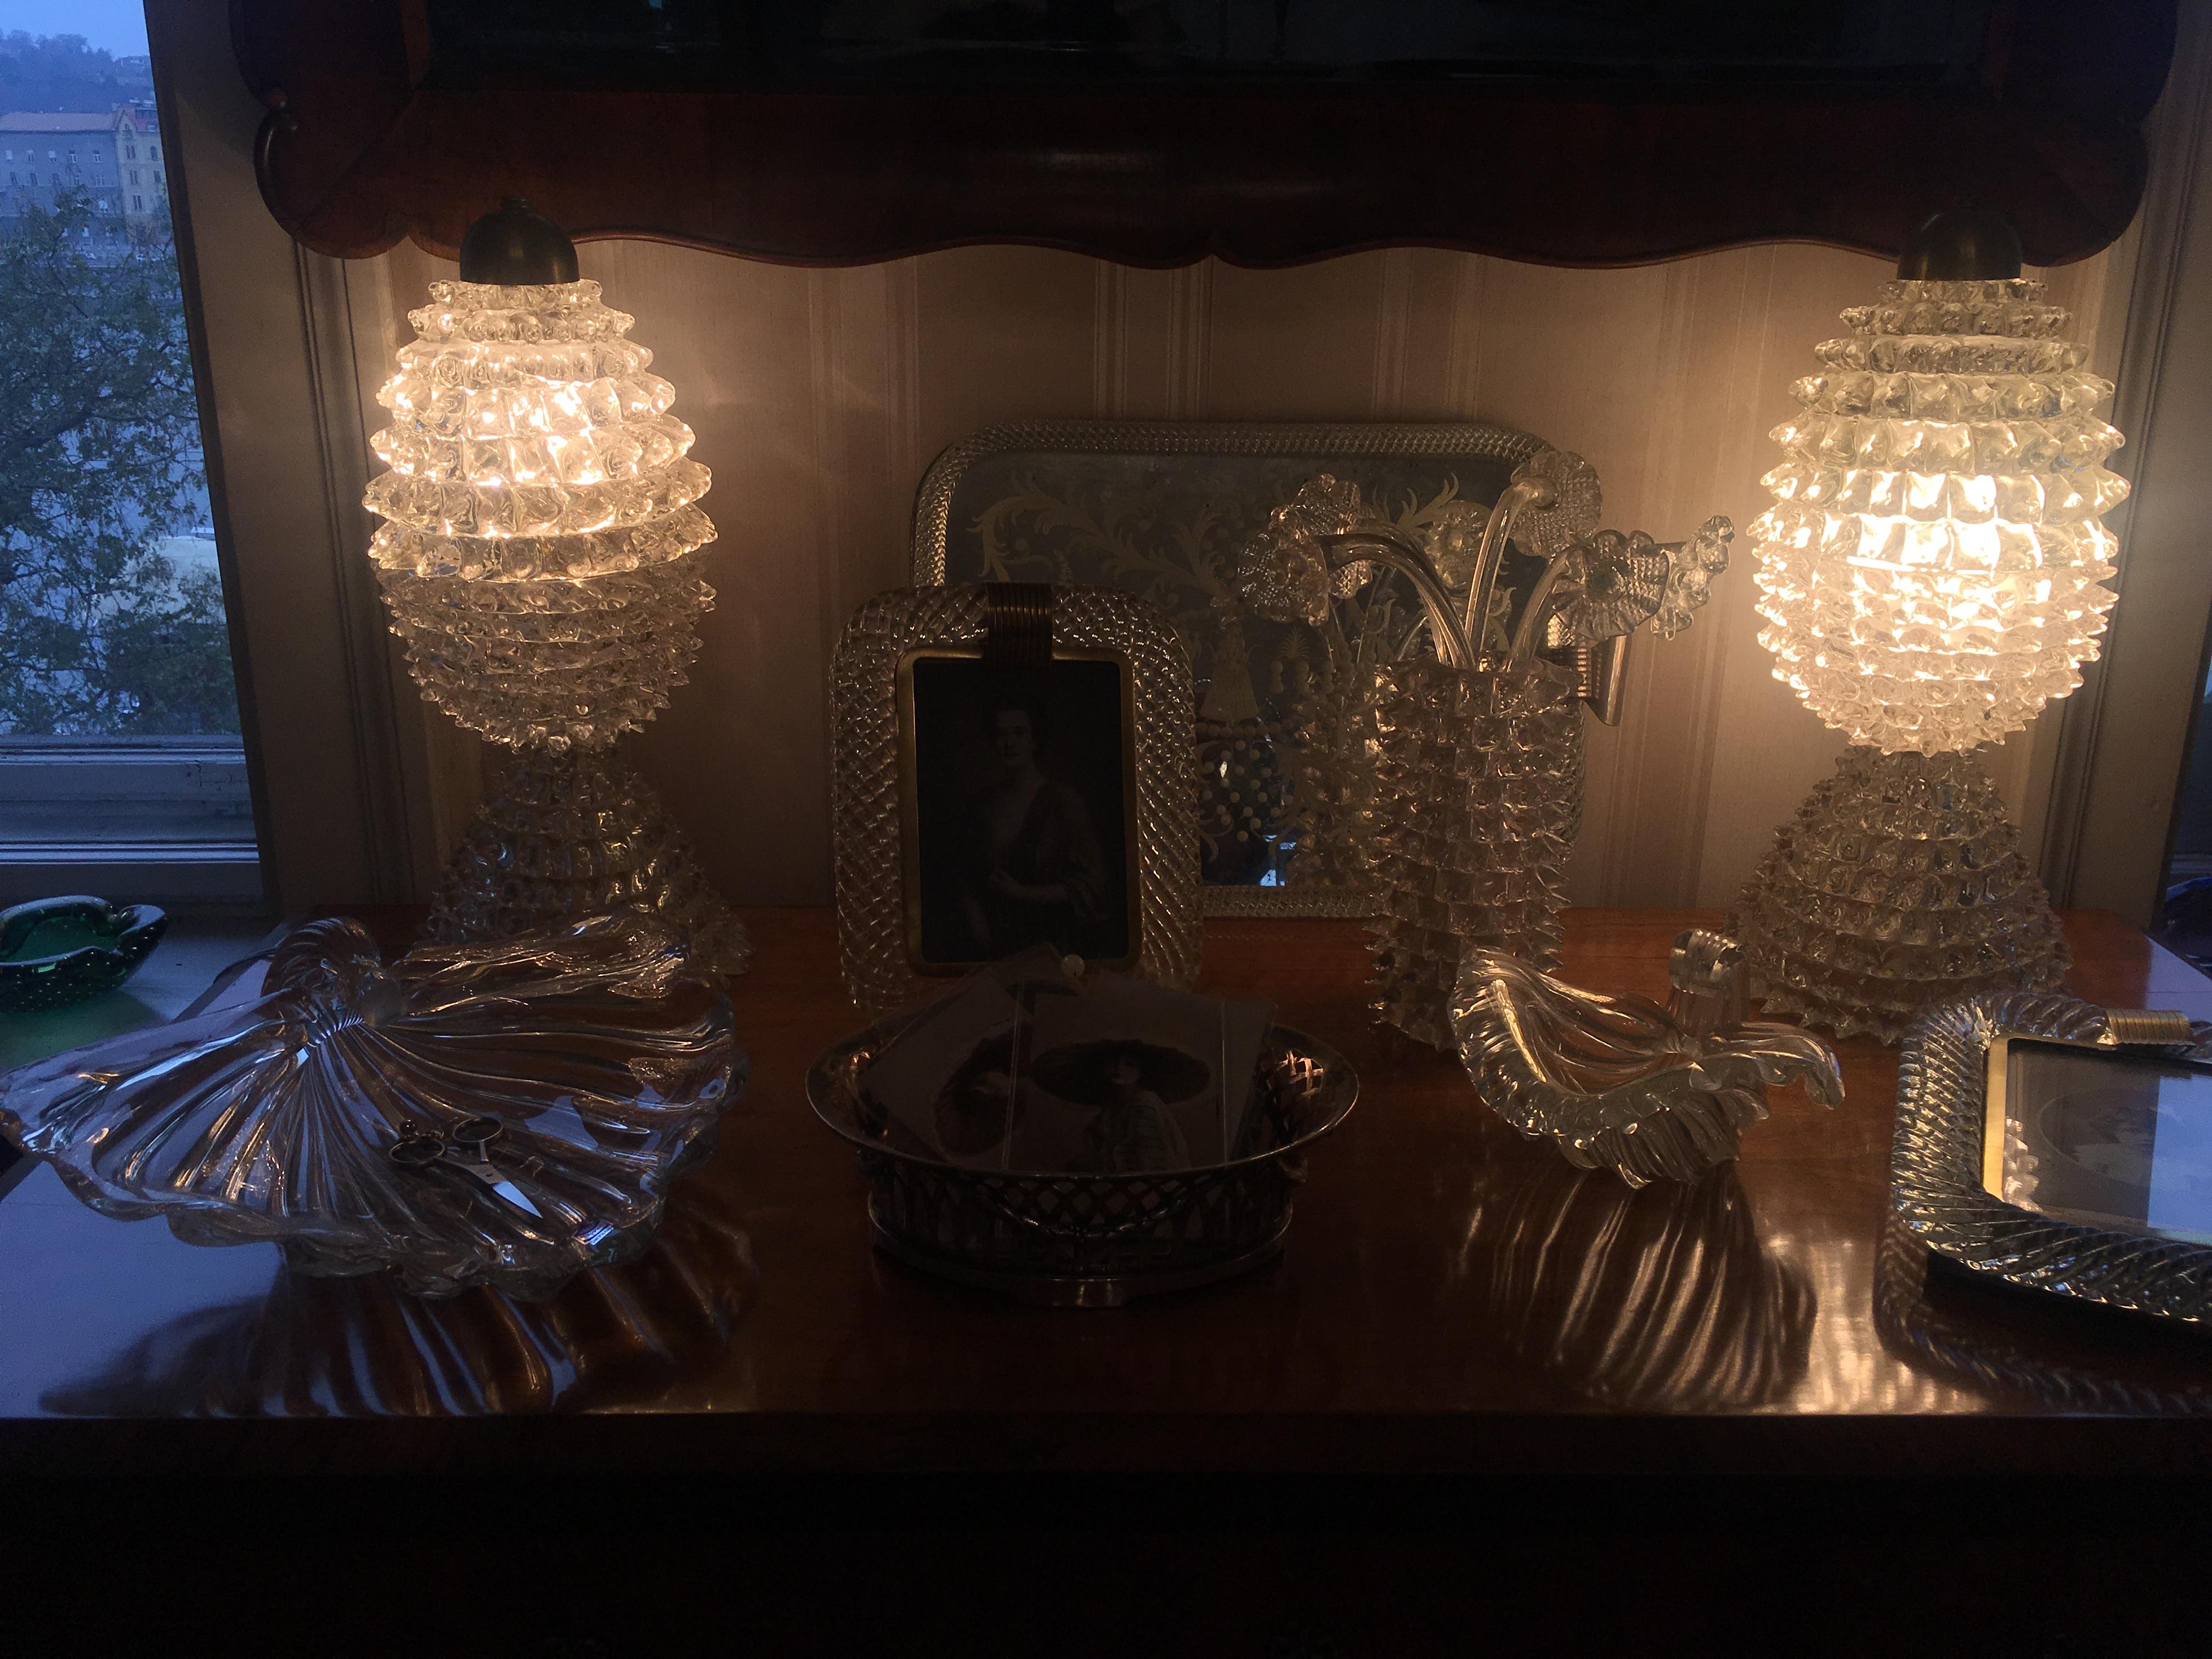 Each table lamp is made up of three cups in Murano glass 